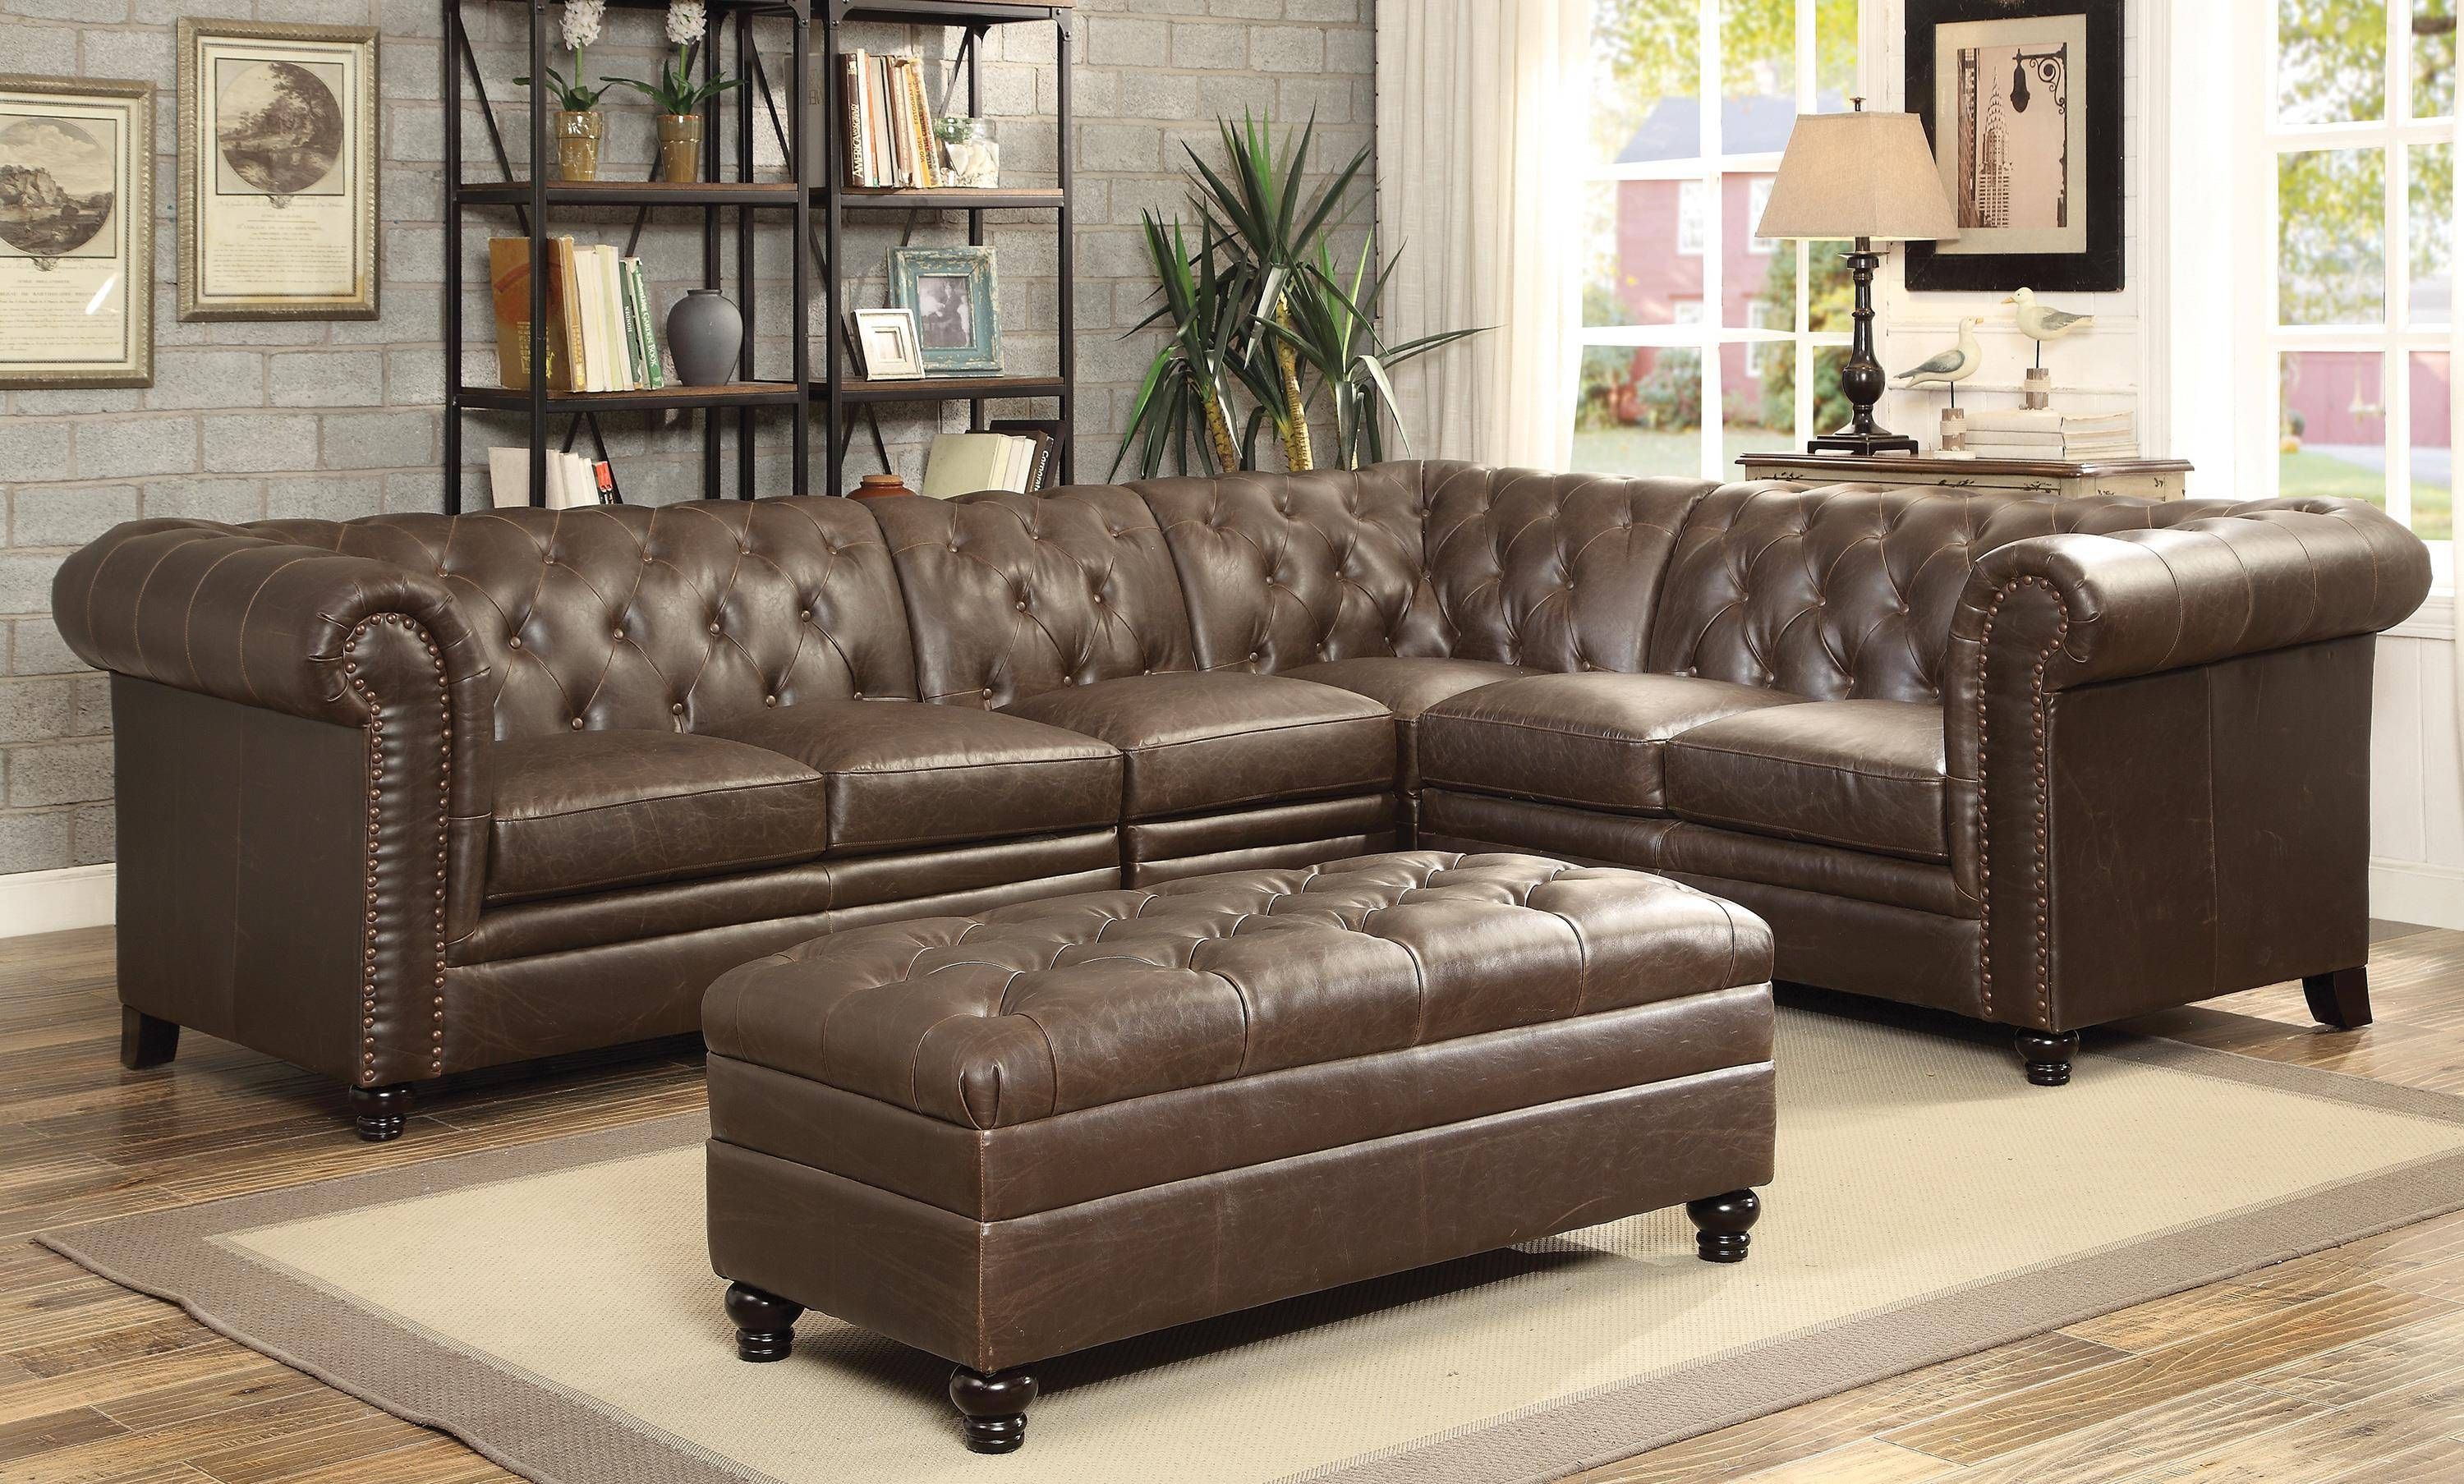 Sofa: Comfort And Style Is Evident In This Dynamic With Tufted Within Tufted Sectional Sofa Chaise (Photo 4 of 25)